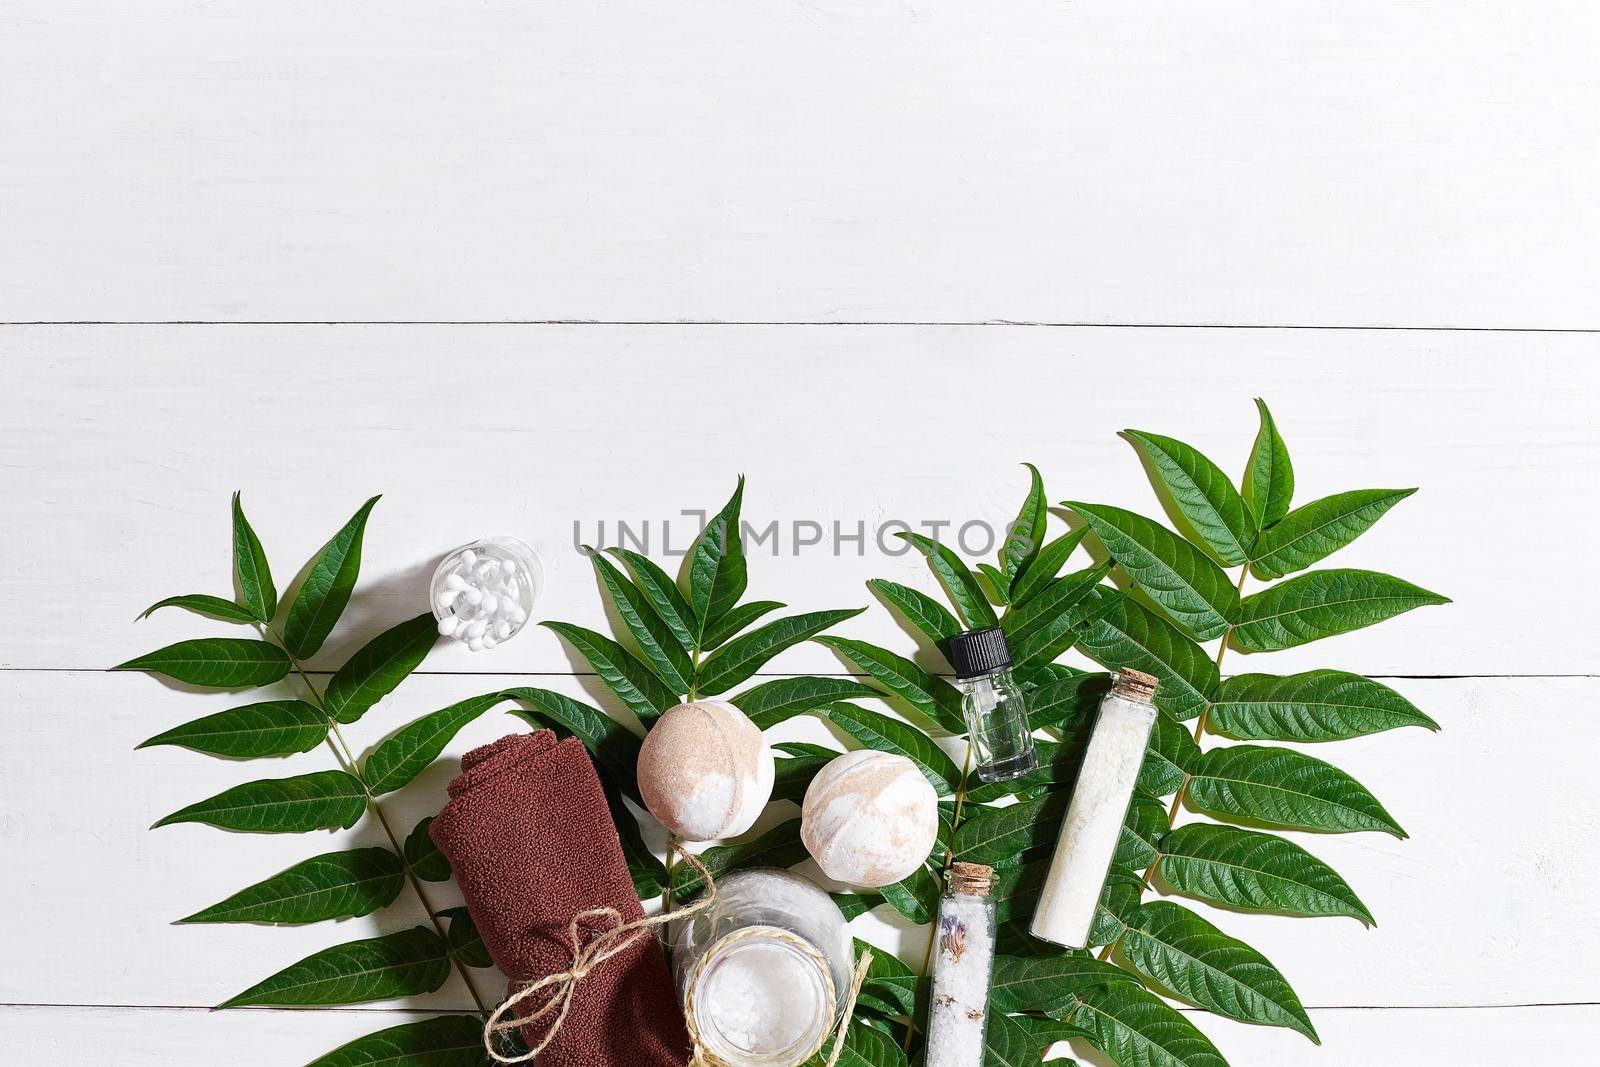 Natural spa and aromatherapy skincare beauty products with bathroom accessories including exfoliating scrubs, oils, sponges, bath bombs and soaps. Top view. Copy space. Still life. flat lay